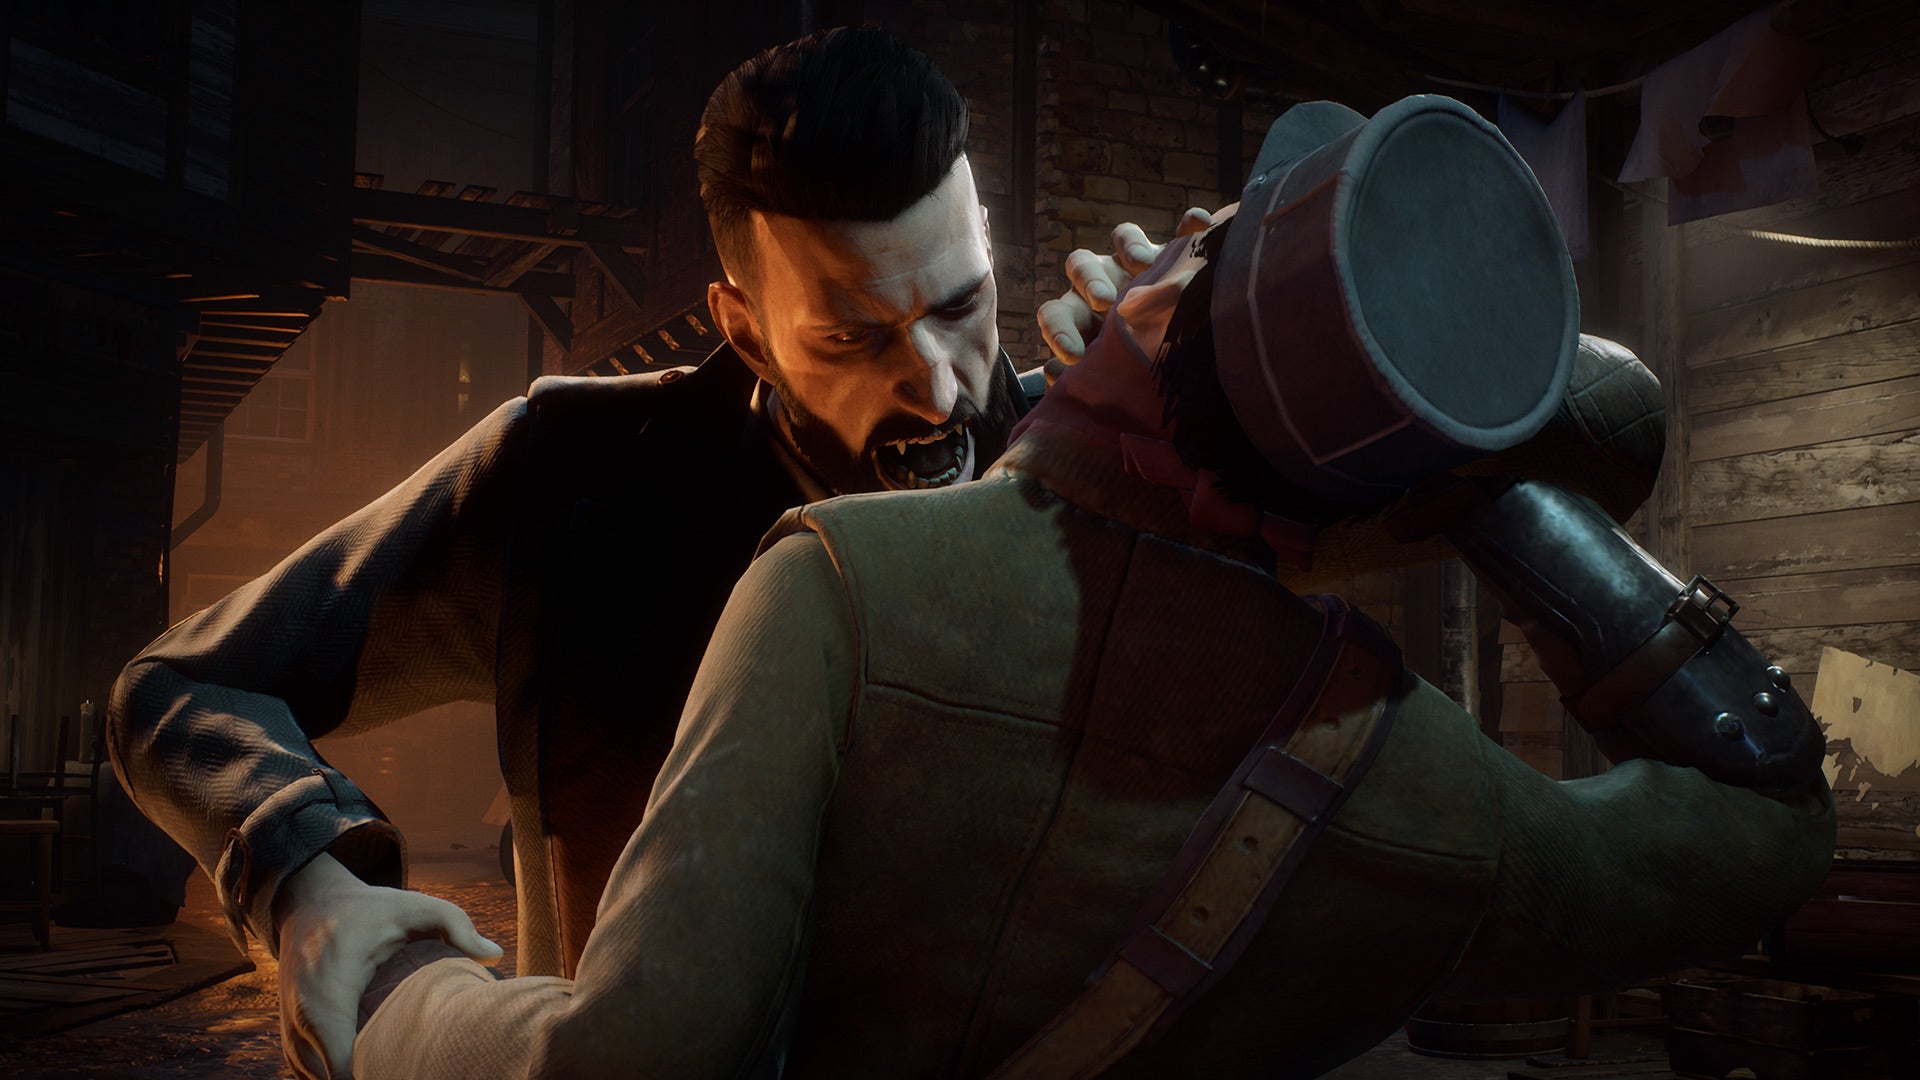 Image for Vampyr is being adapted for television by Fox 21 which is also producing Life is Strange